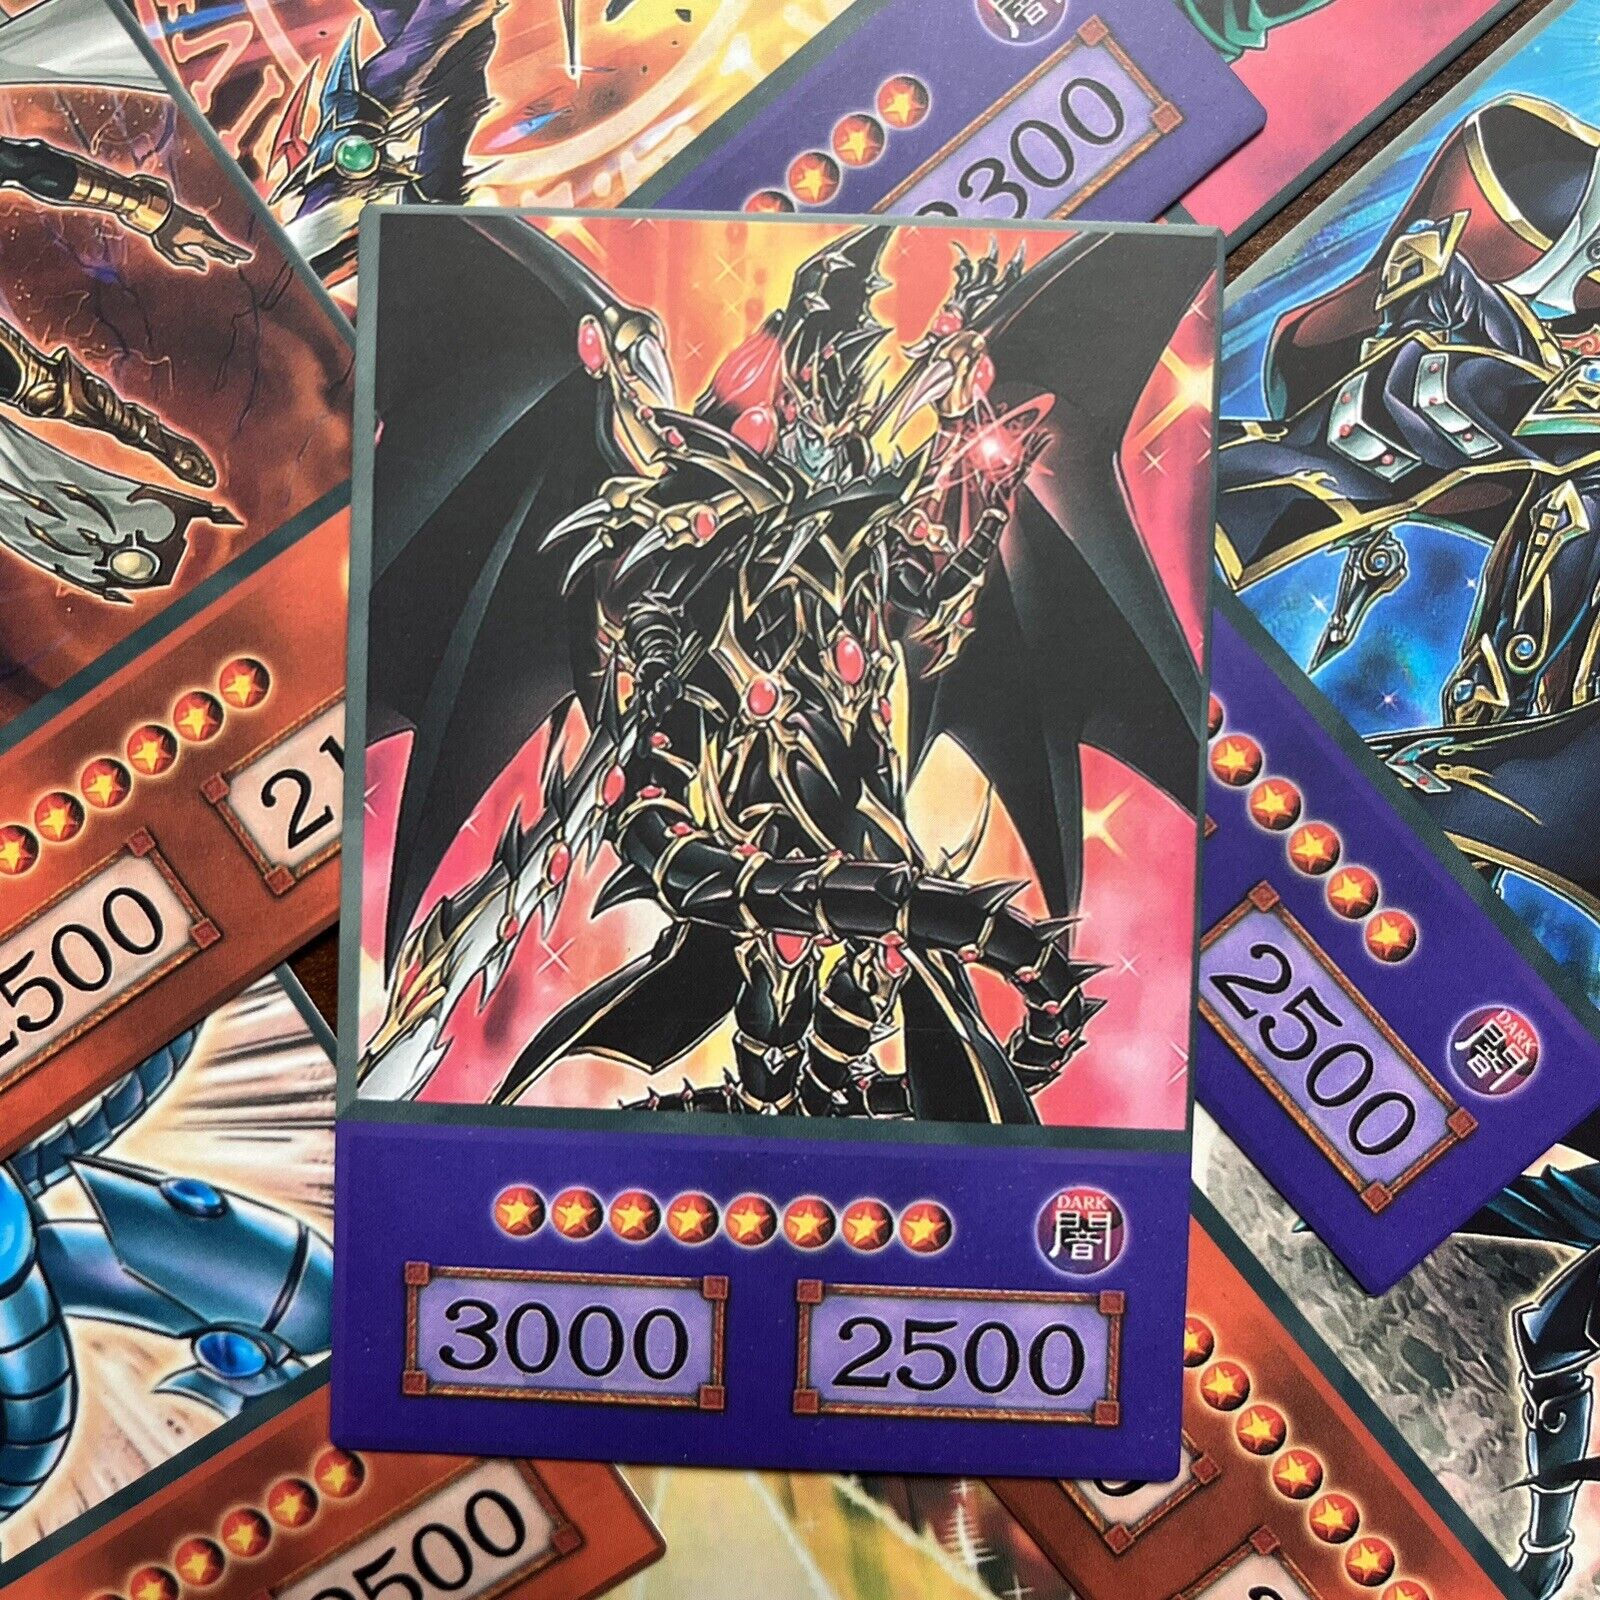 Yugioh Anime Style 10 Card Specialty Set - 10 Cards (Red Eyes Dark Dragoon &more